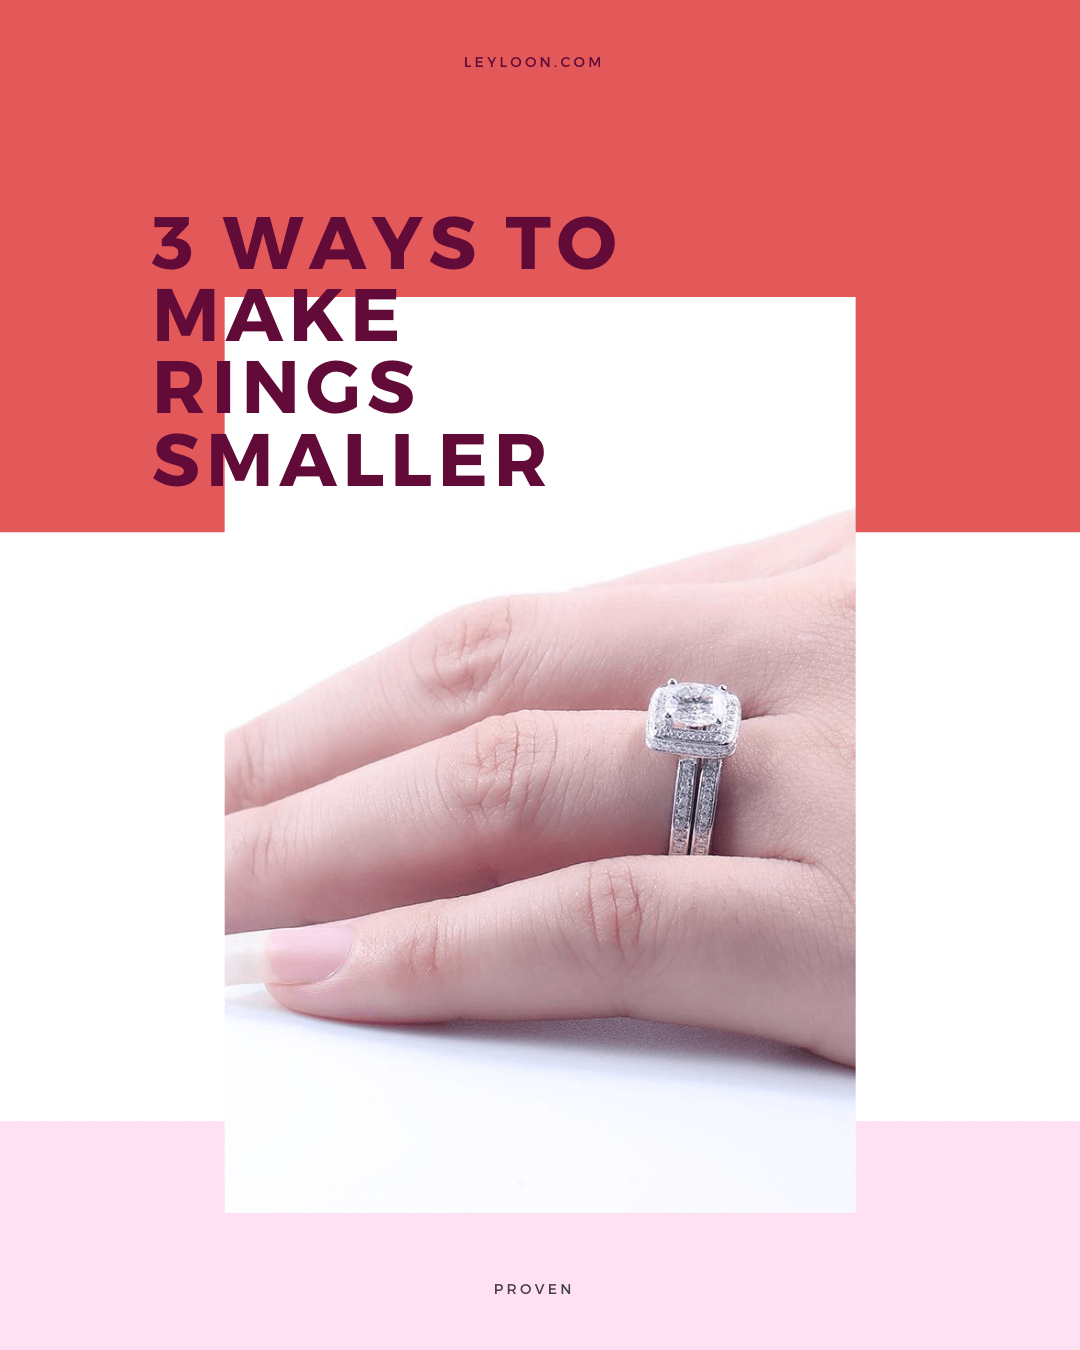 3 Ways to Shrink Rings - wikiHow